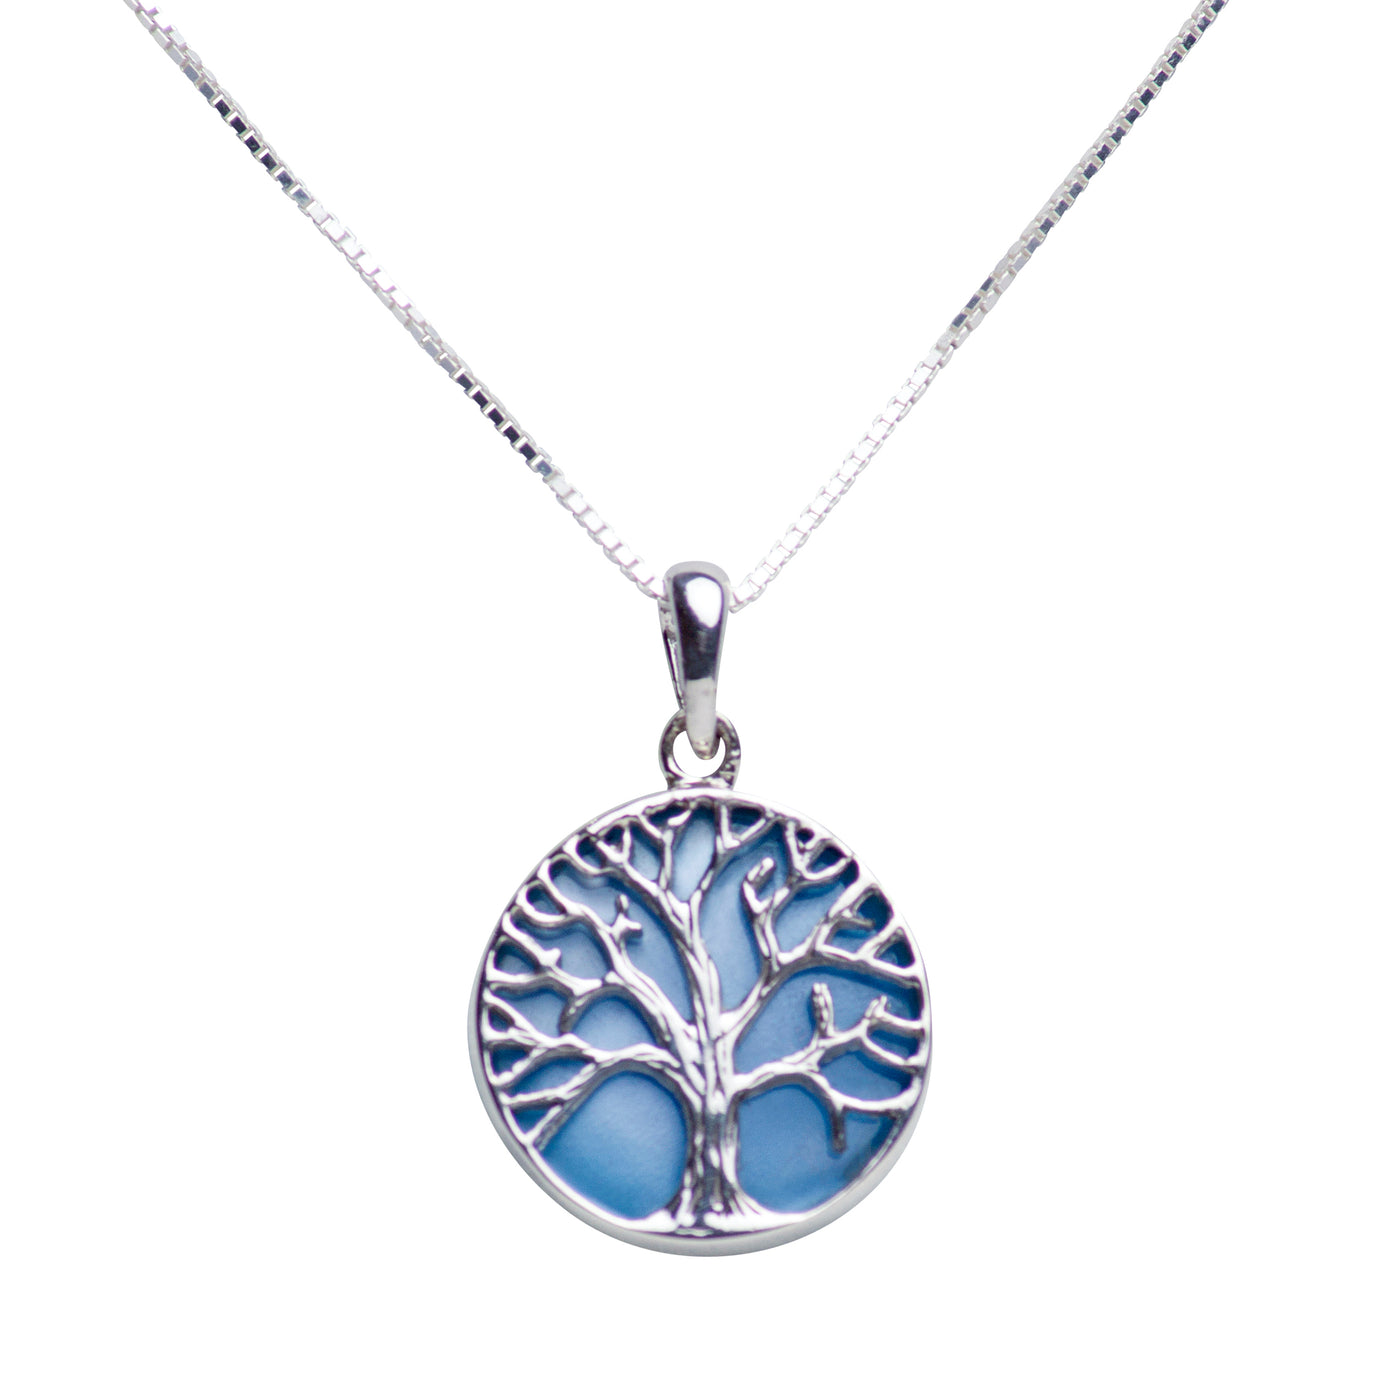 Blue Mother of Pearl Sterling Silver Tree of Life Pendant Necklace